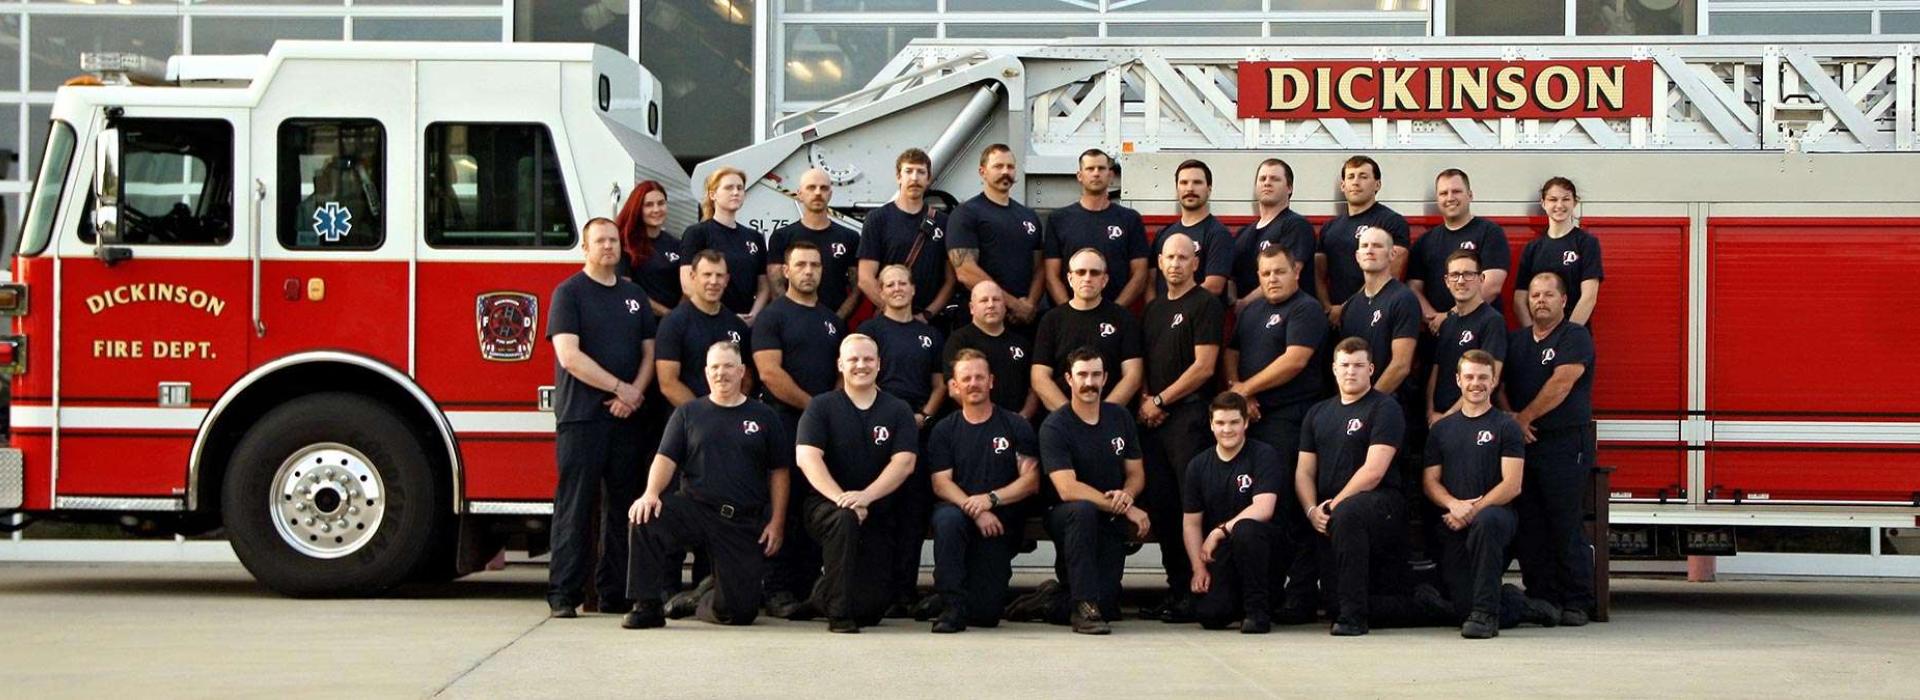 Fire department staff in front of fire truck